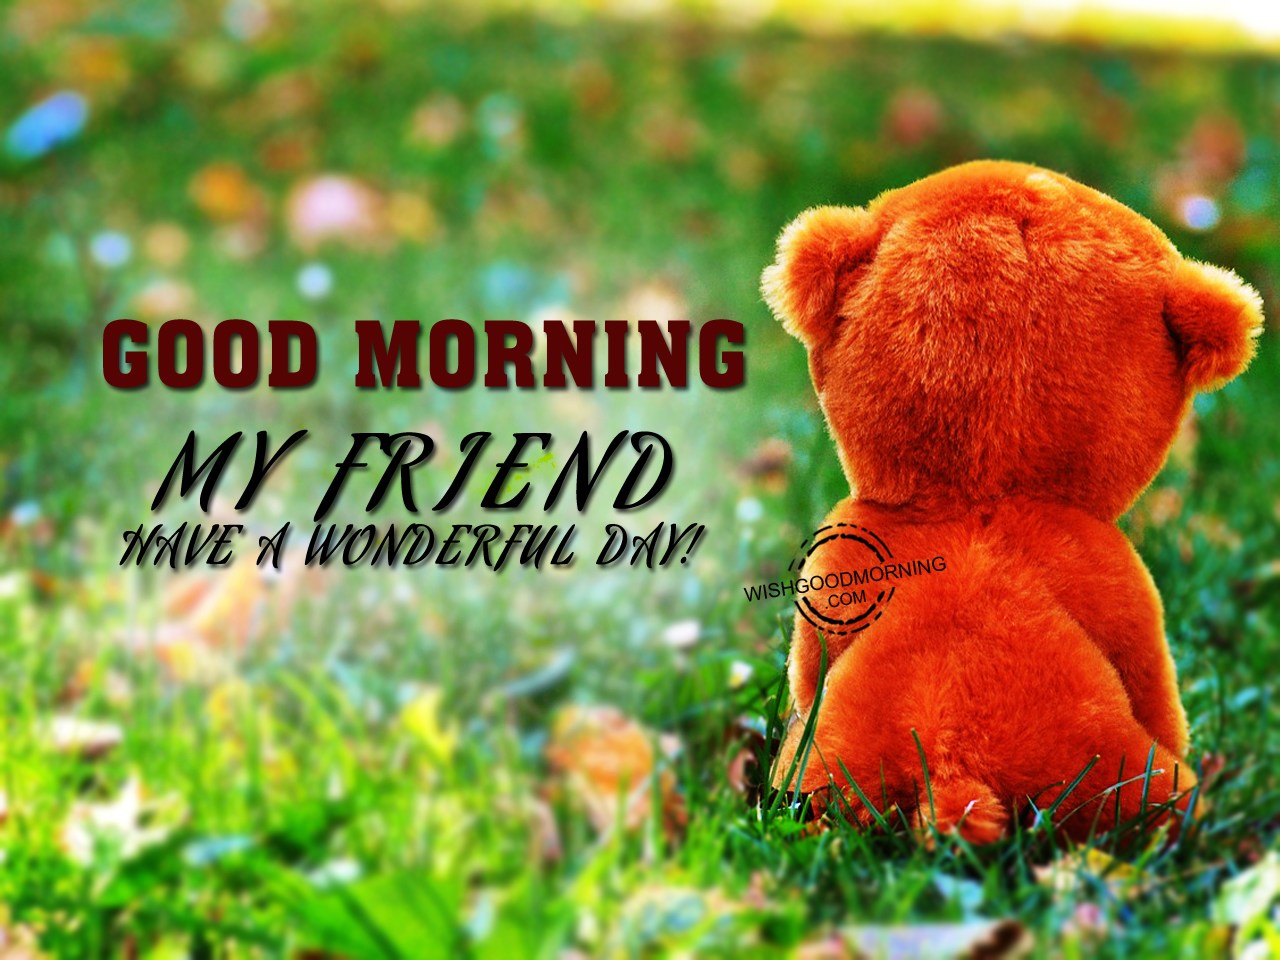 Good Morning My Friend - Good Morning Pictures – WishGoodMorning.com